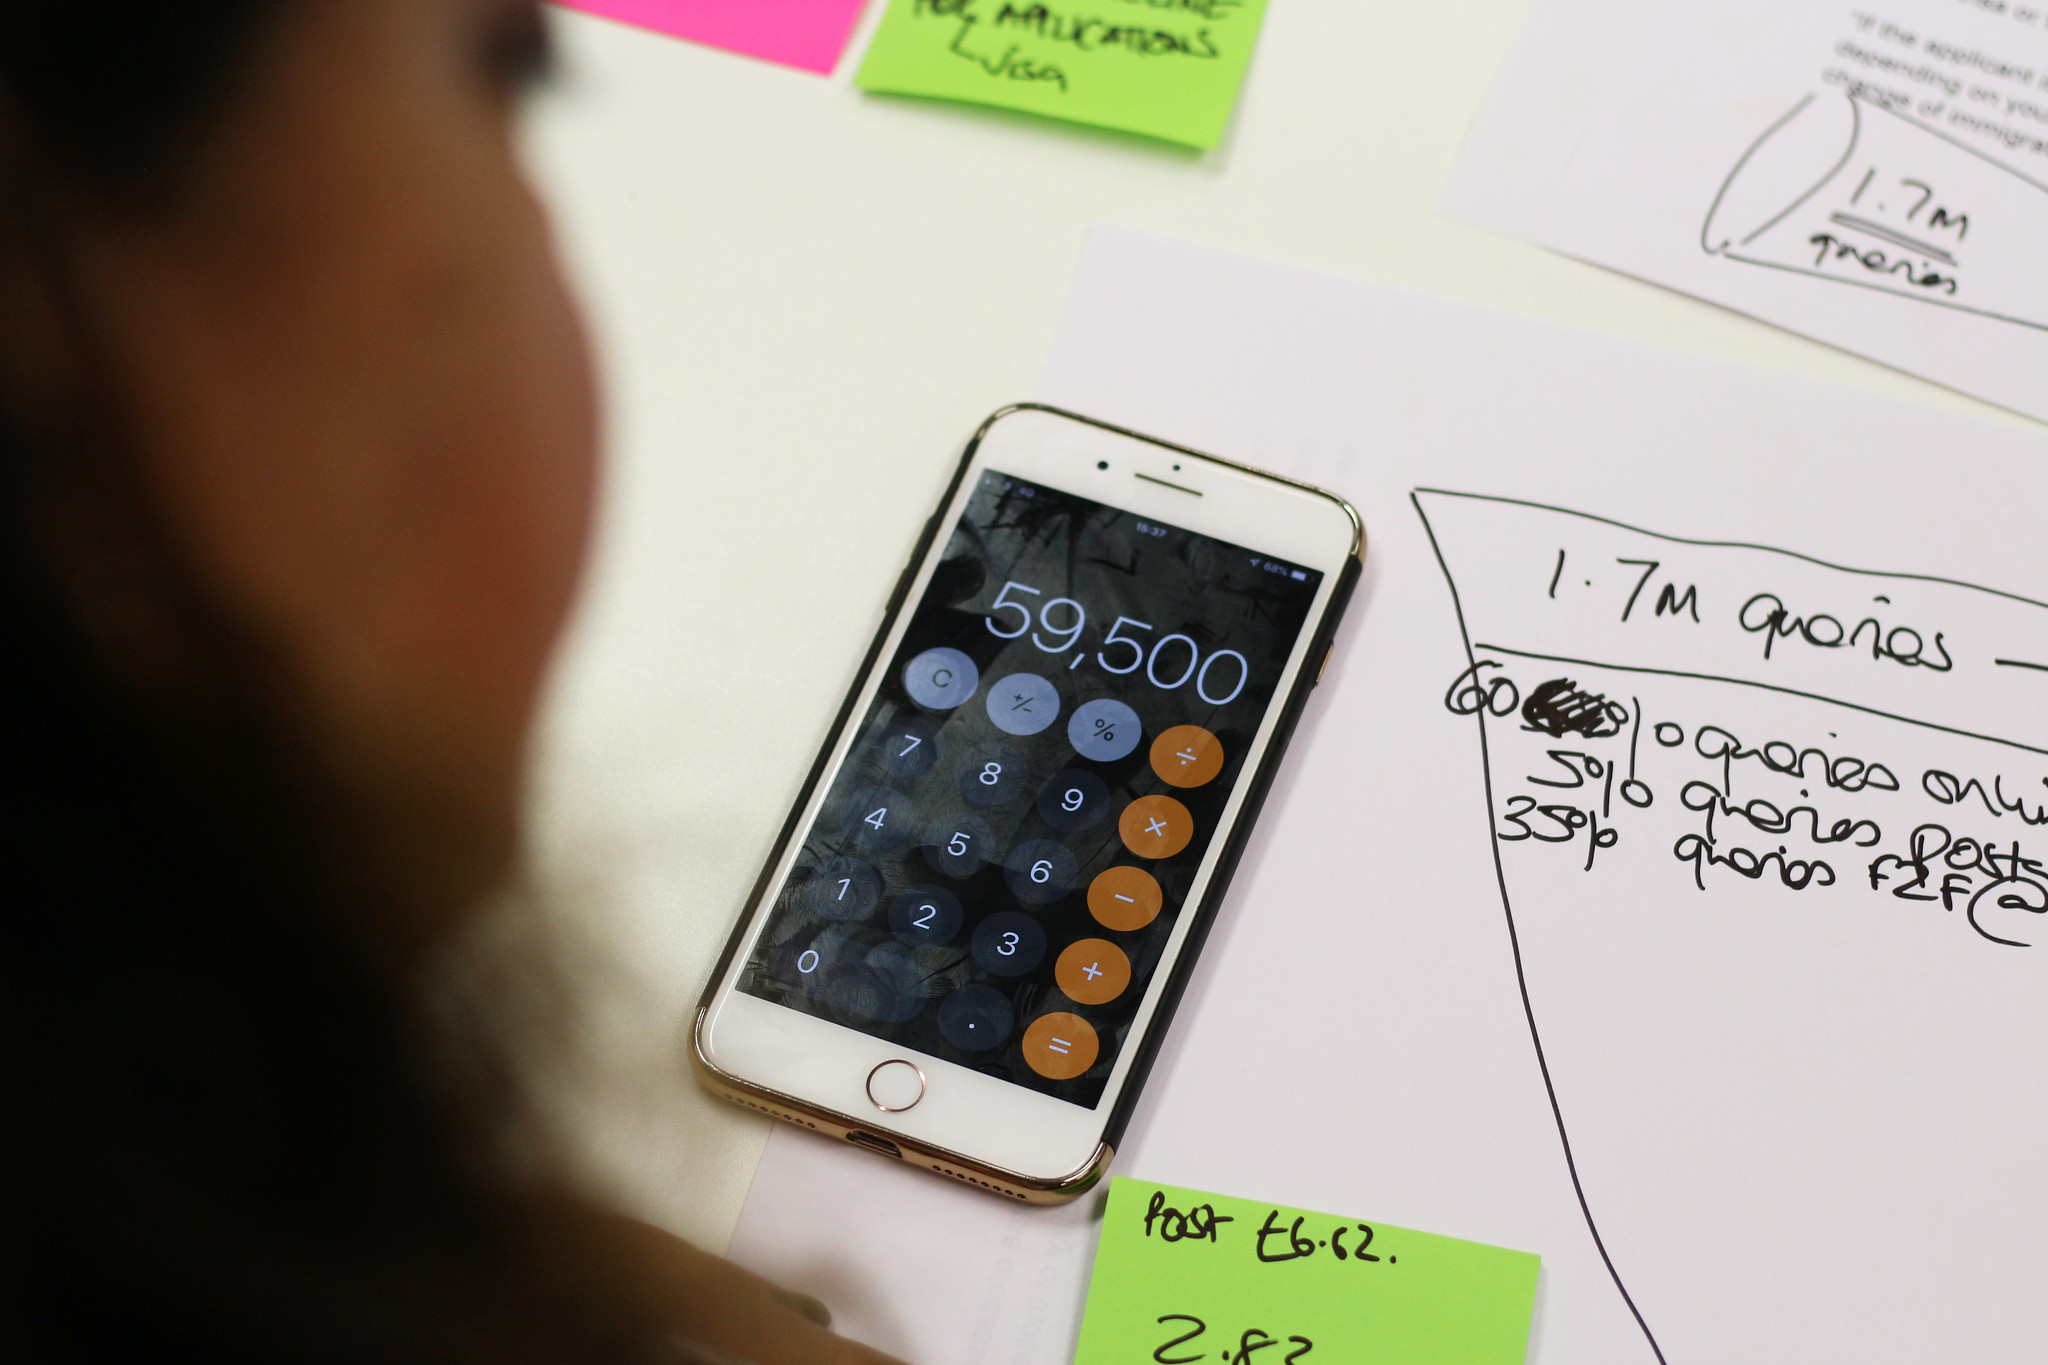 An image a person looking at a calculator on an iphone over a table. Next to the phone on the table there are post it notes and paper with scribbles of numbers and estimates for cost